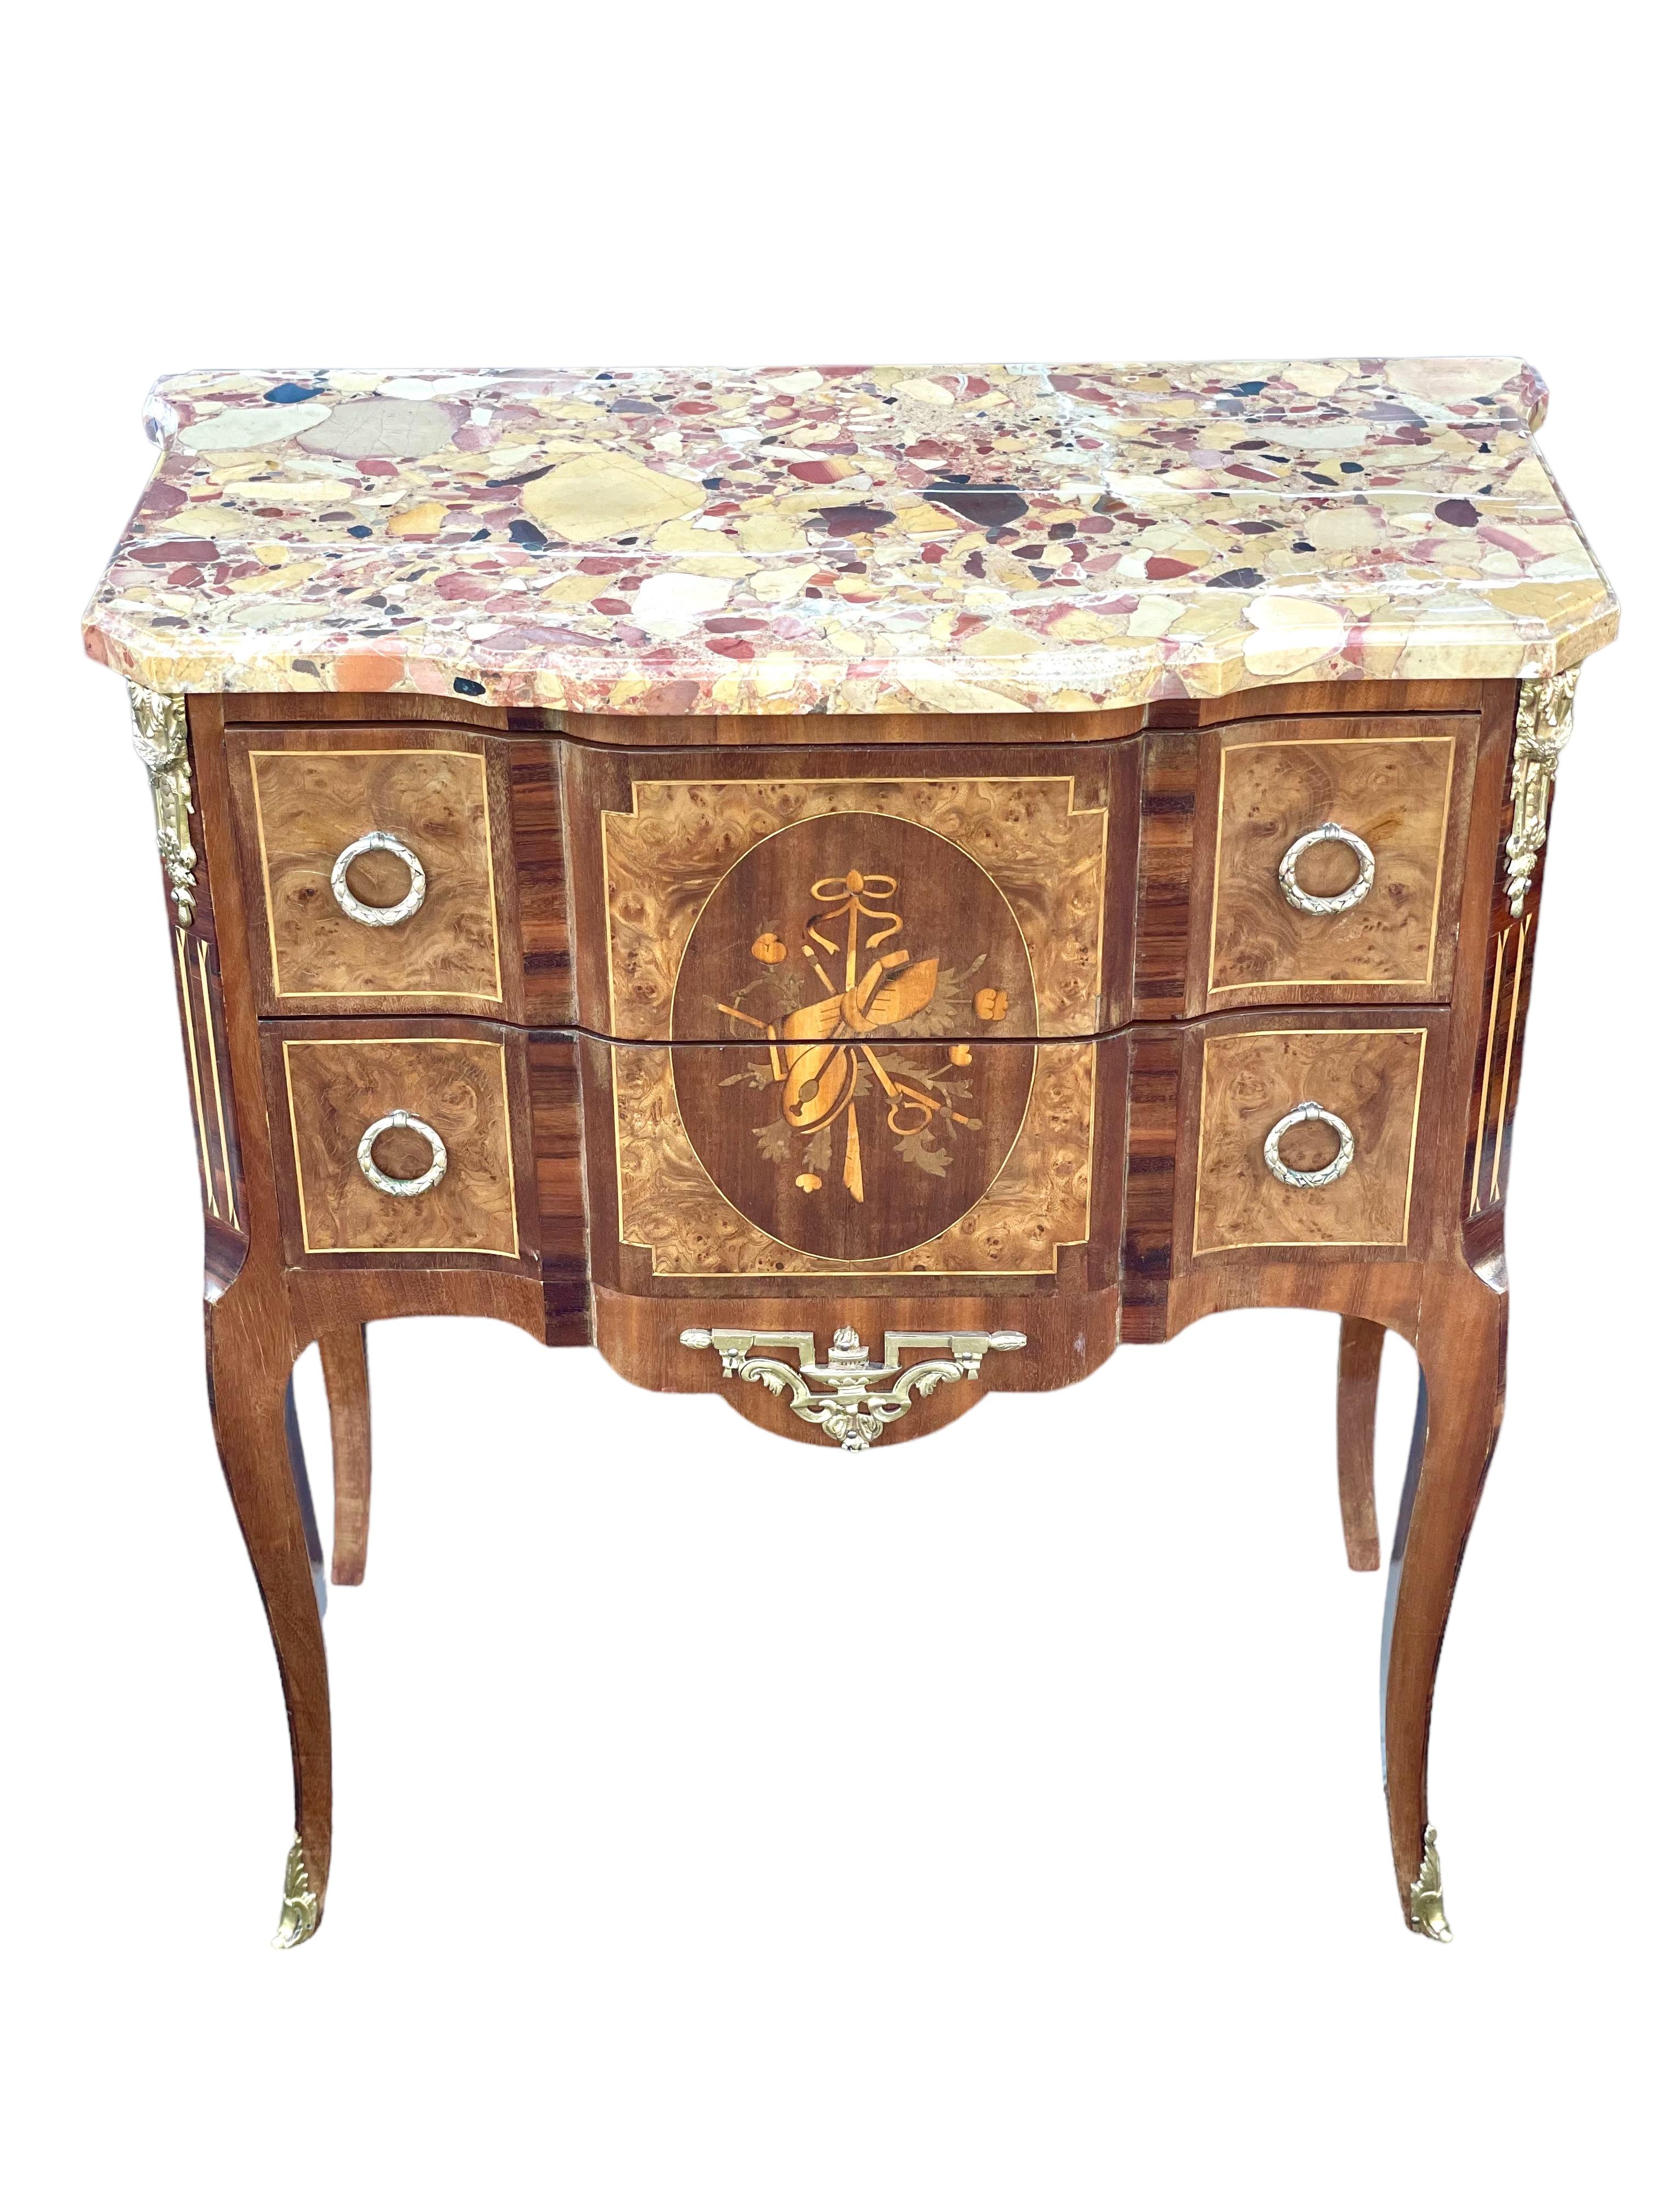 Bronze 19th Century French Transitional Commodes with Marble Tops For Sale